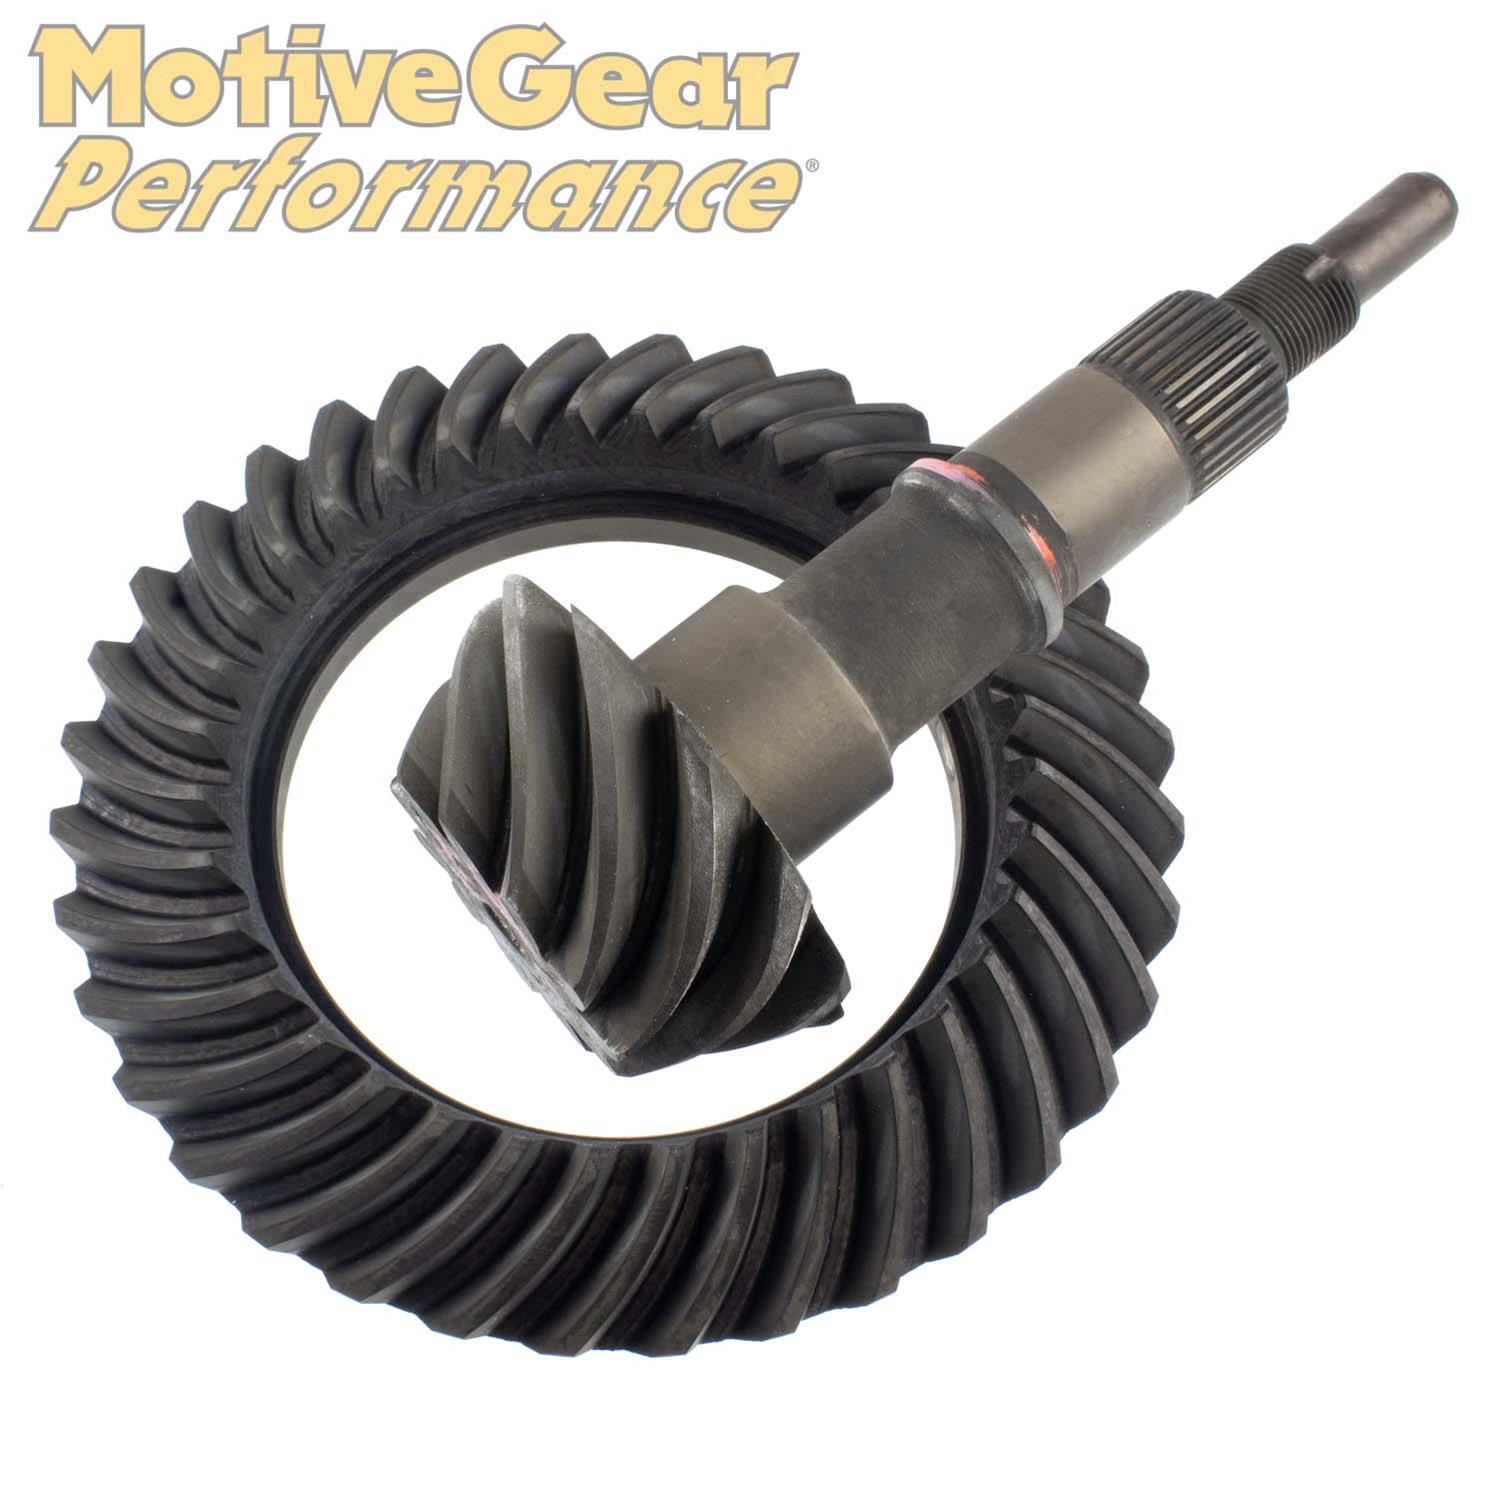 2010-2015 Camaro Motive Gear 3.27 Ring and Pinion Set - For 8.6"